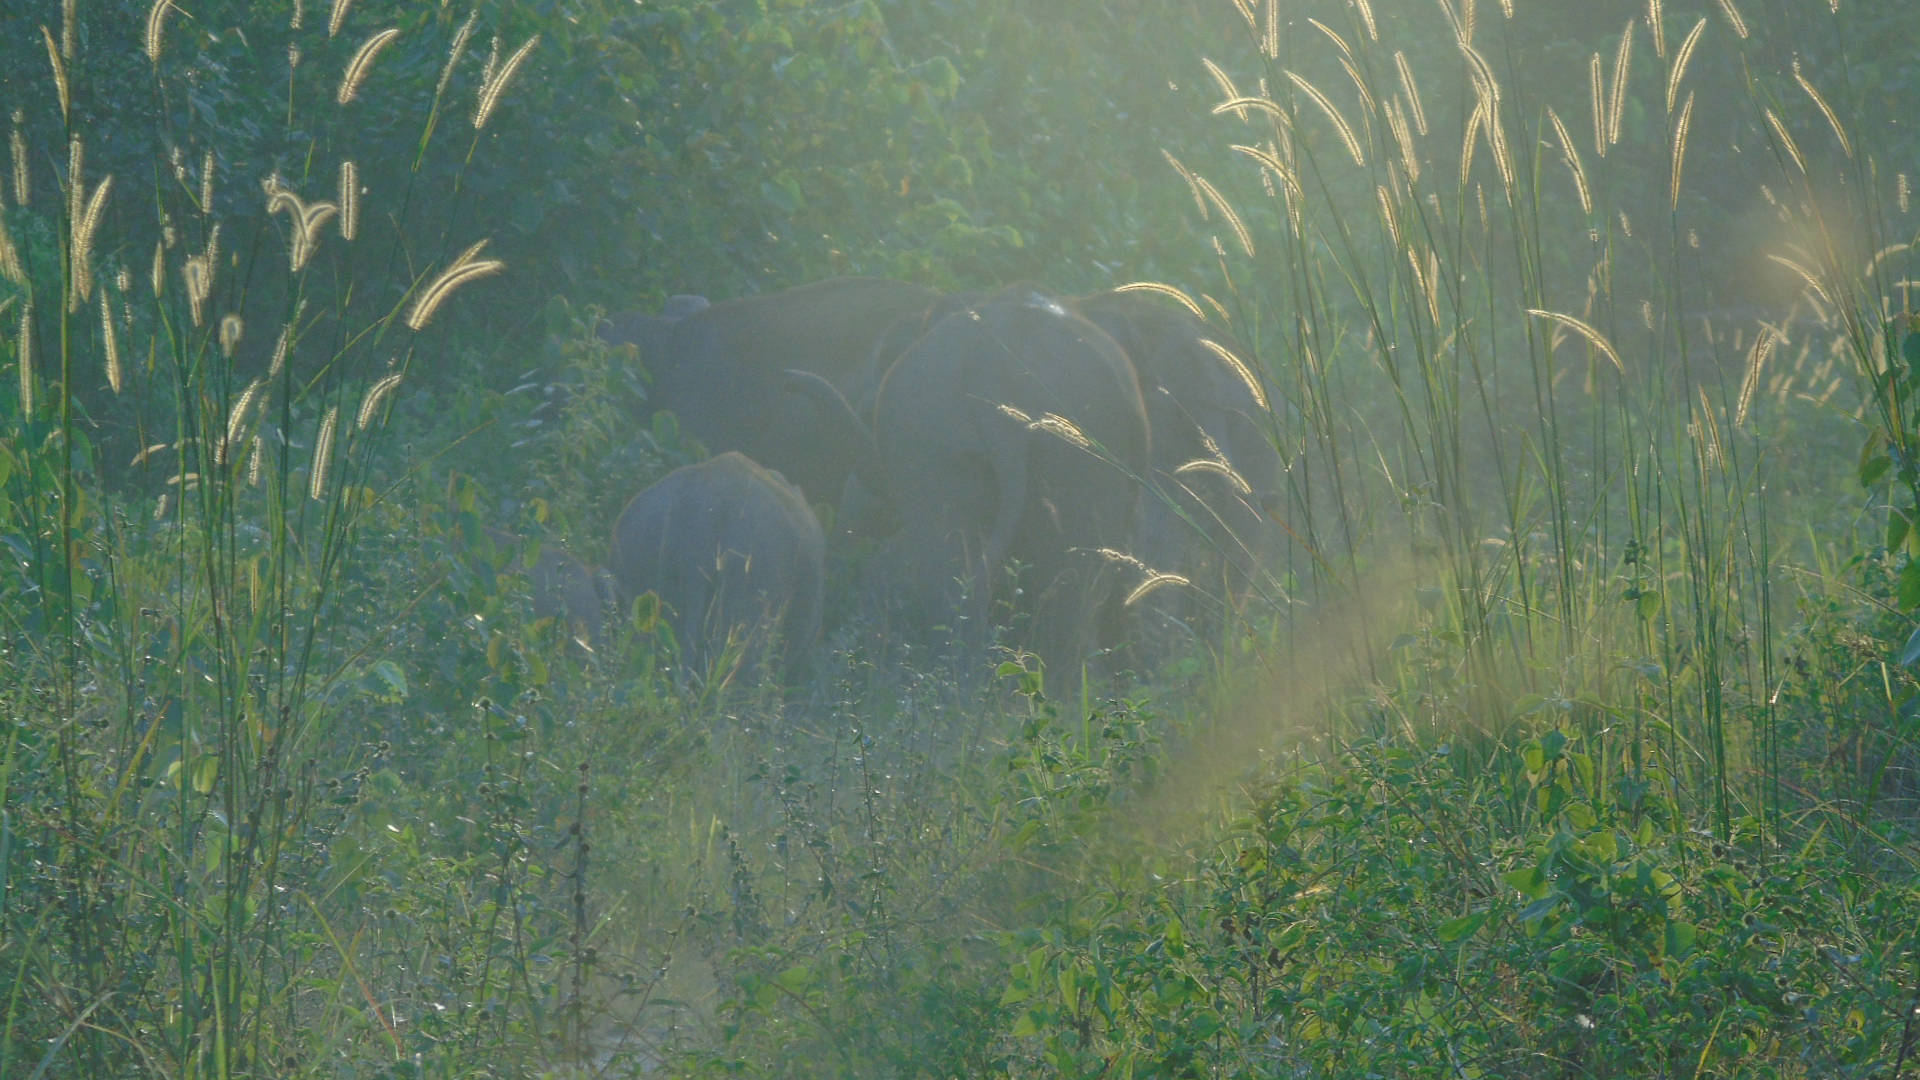 Sumatran elephants disappear into the jungle in the evening light